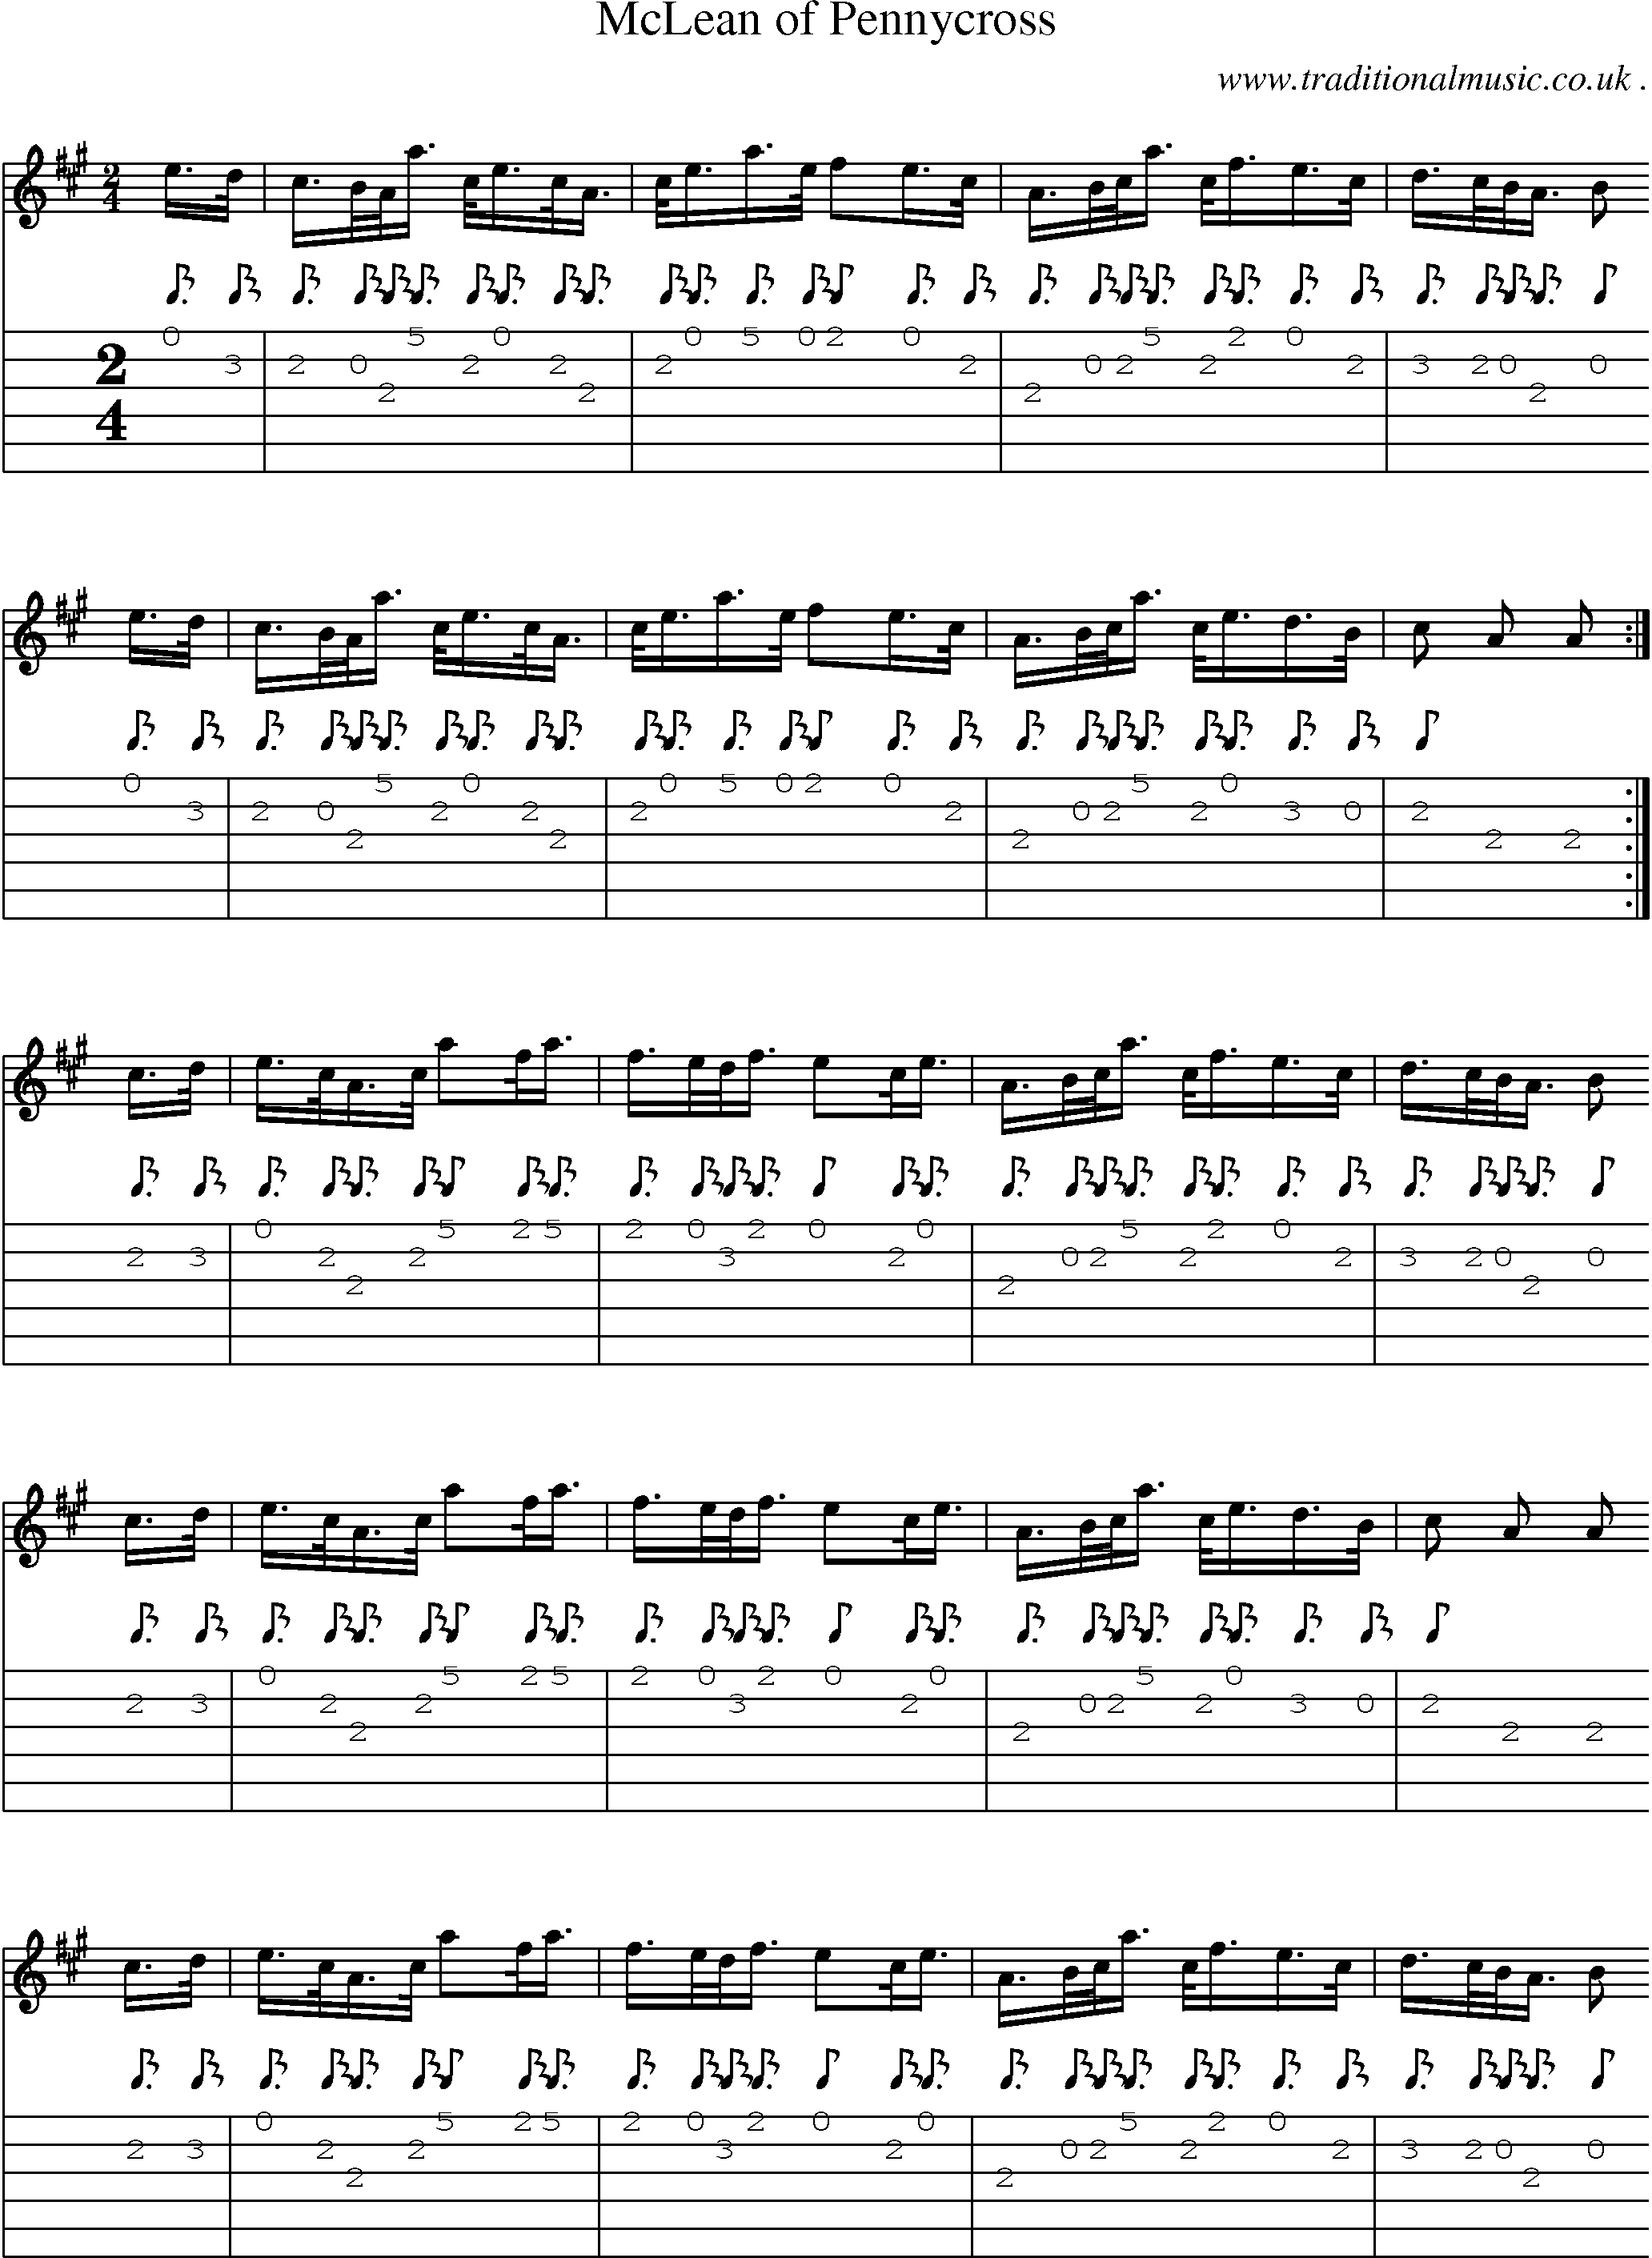 Sheet-music  score, Chords and Guitar Tabs for Mclean Of Pennycross